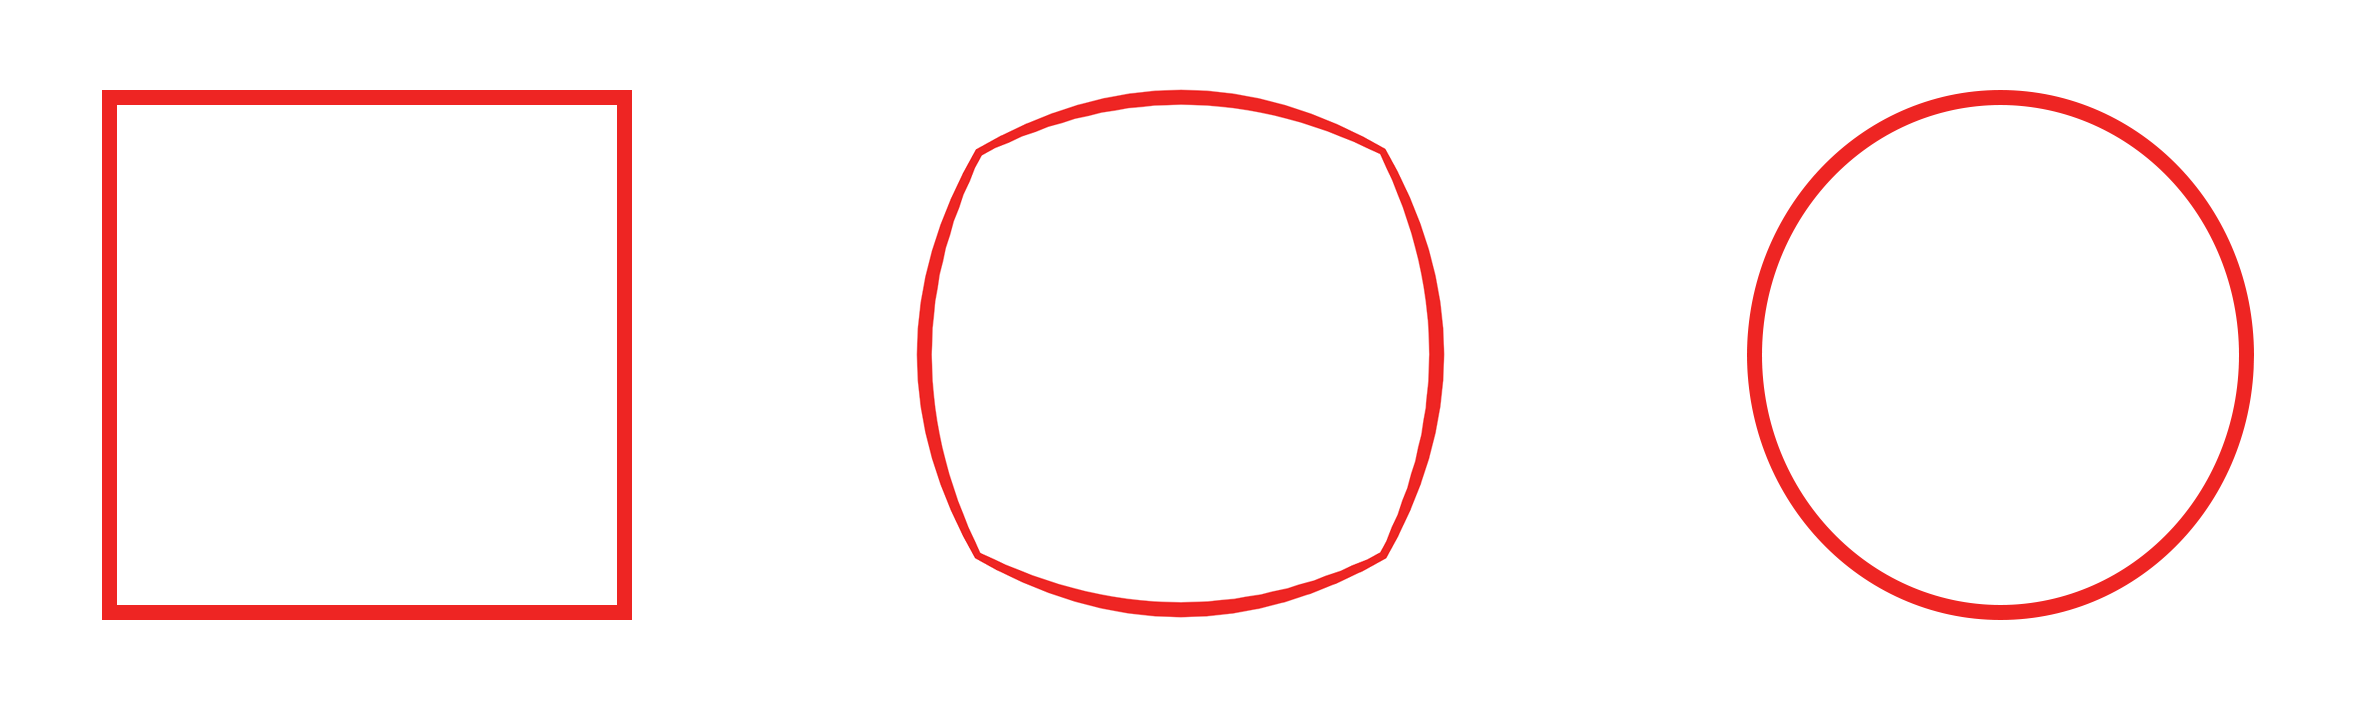 Topological deformation of a circle into a square